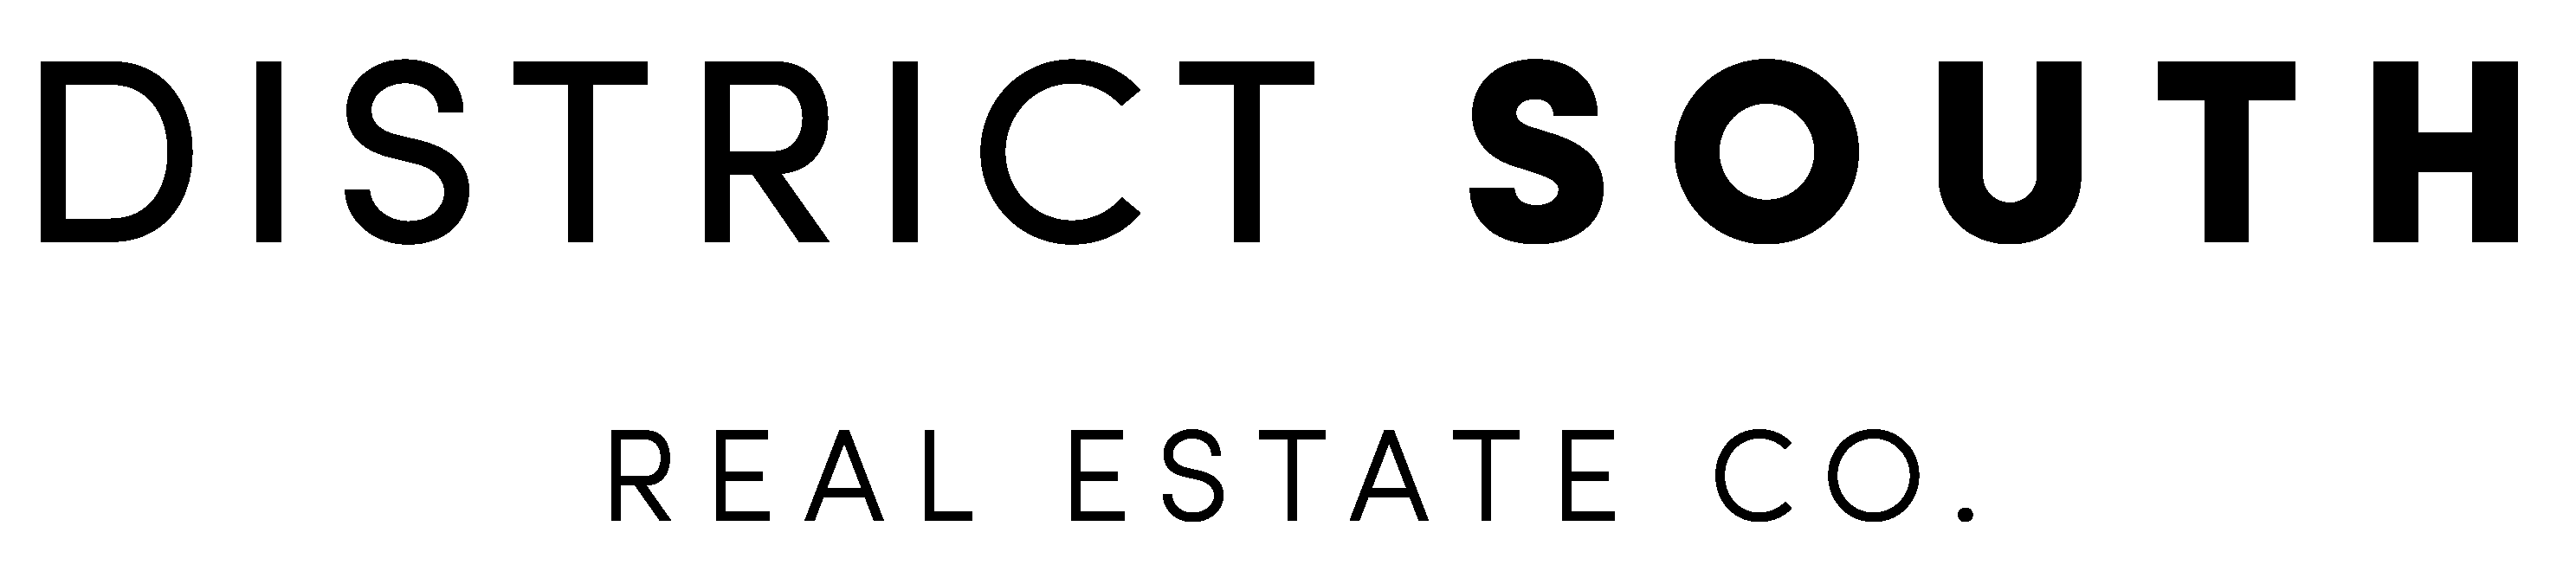 District South Real Estate Co.